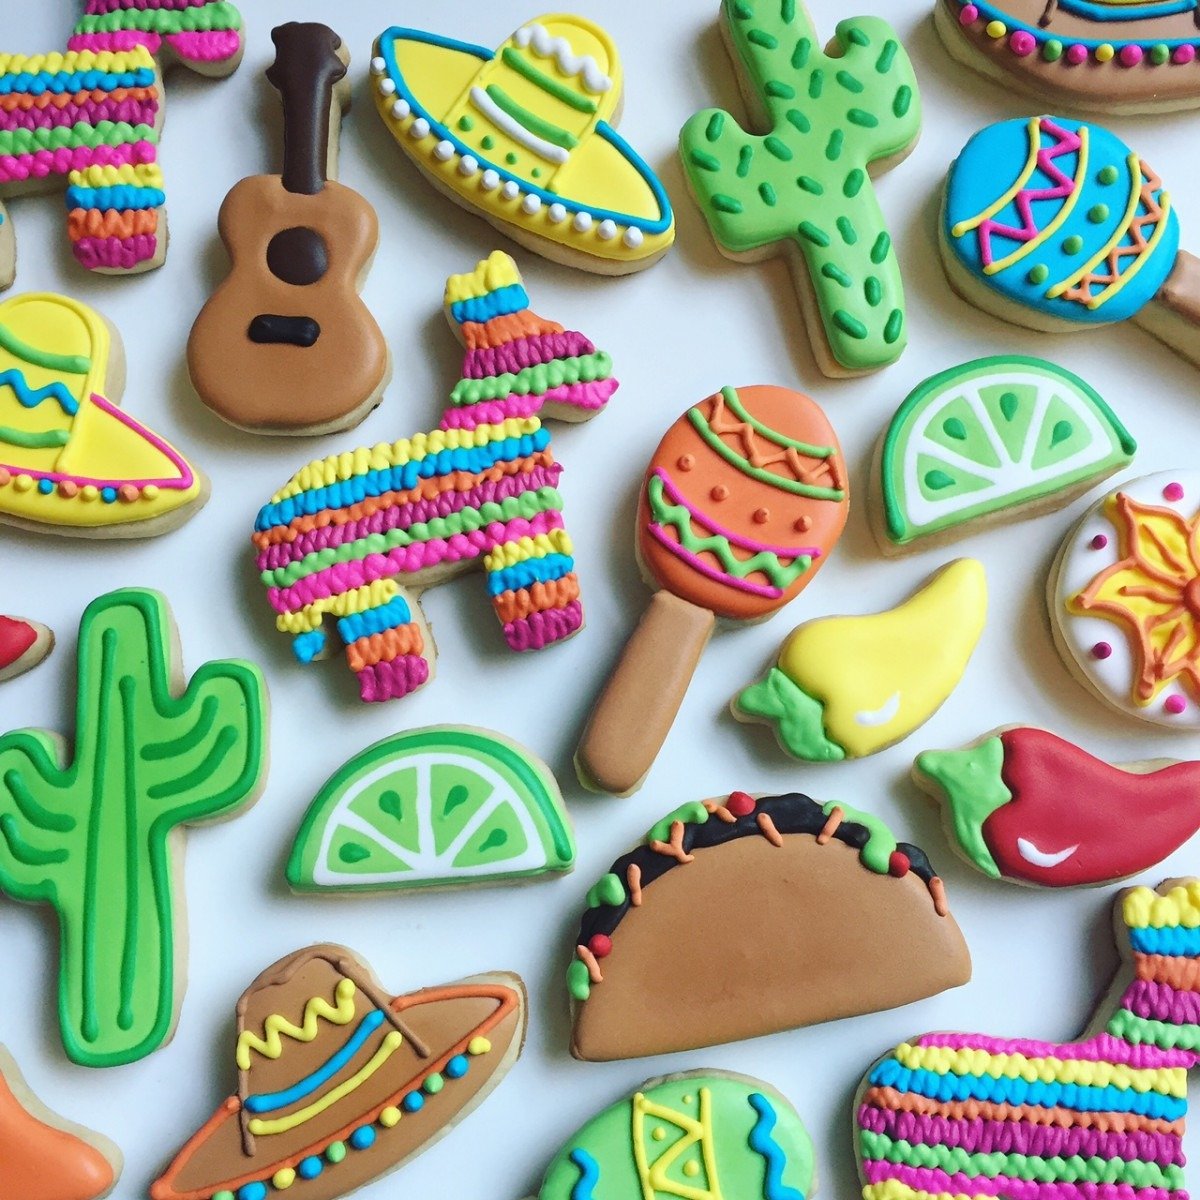 10 Genius Cookie Decorating Hacks Your Kids Can Easily Master